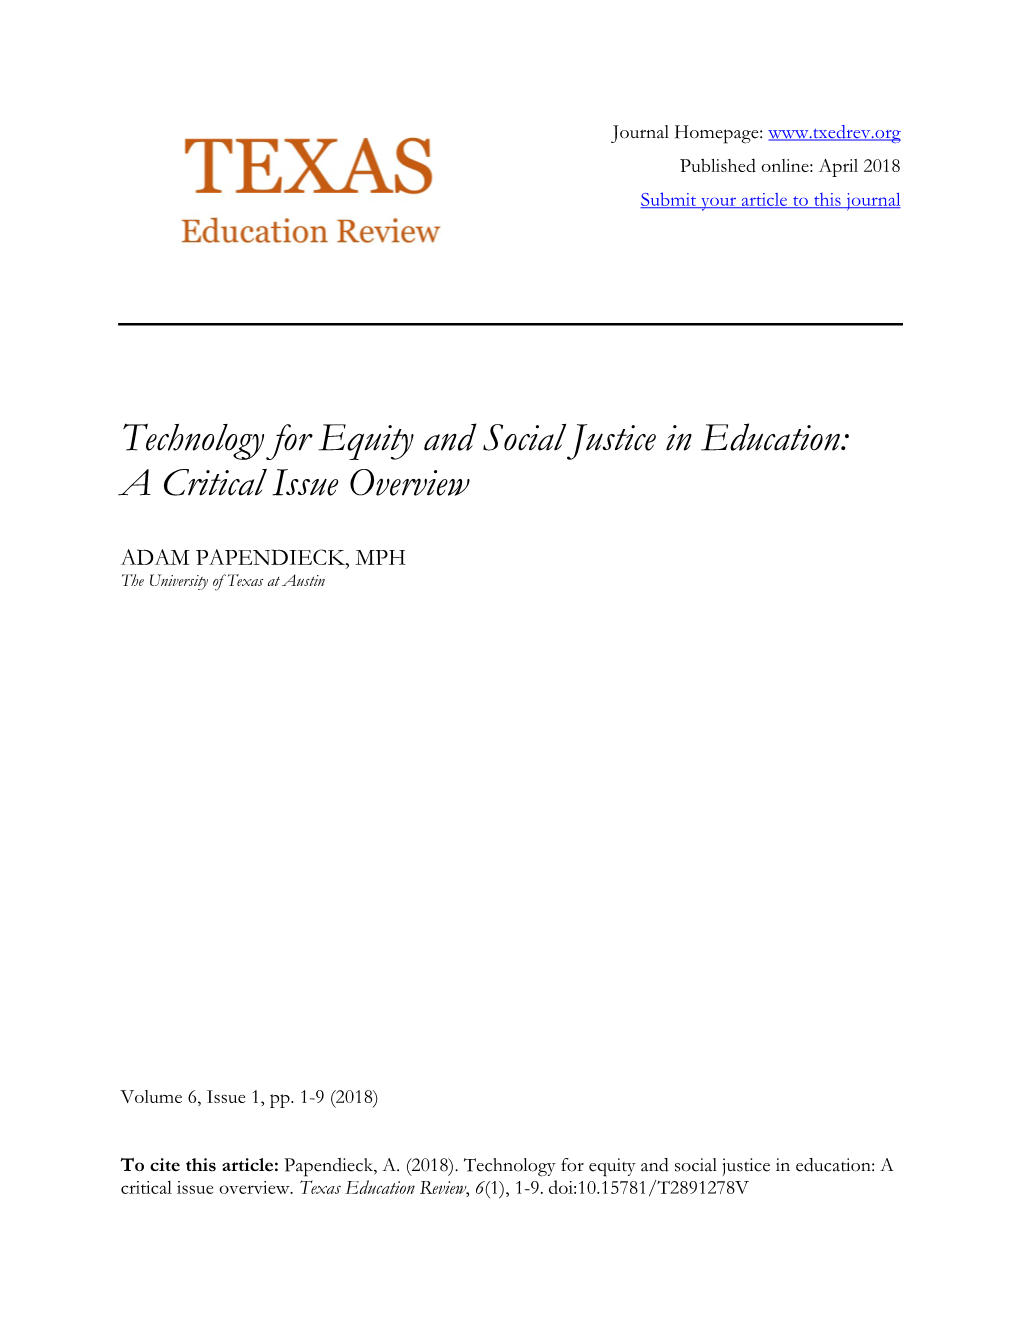 Technology for Equity and Social Justice in Education: a Critical Issue Overview